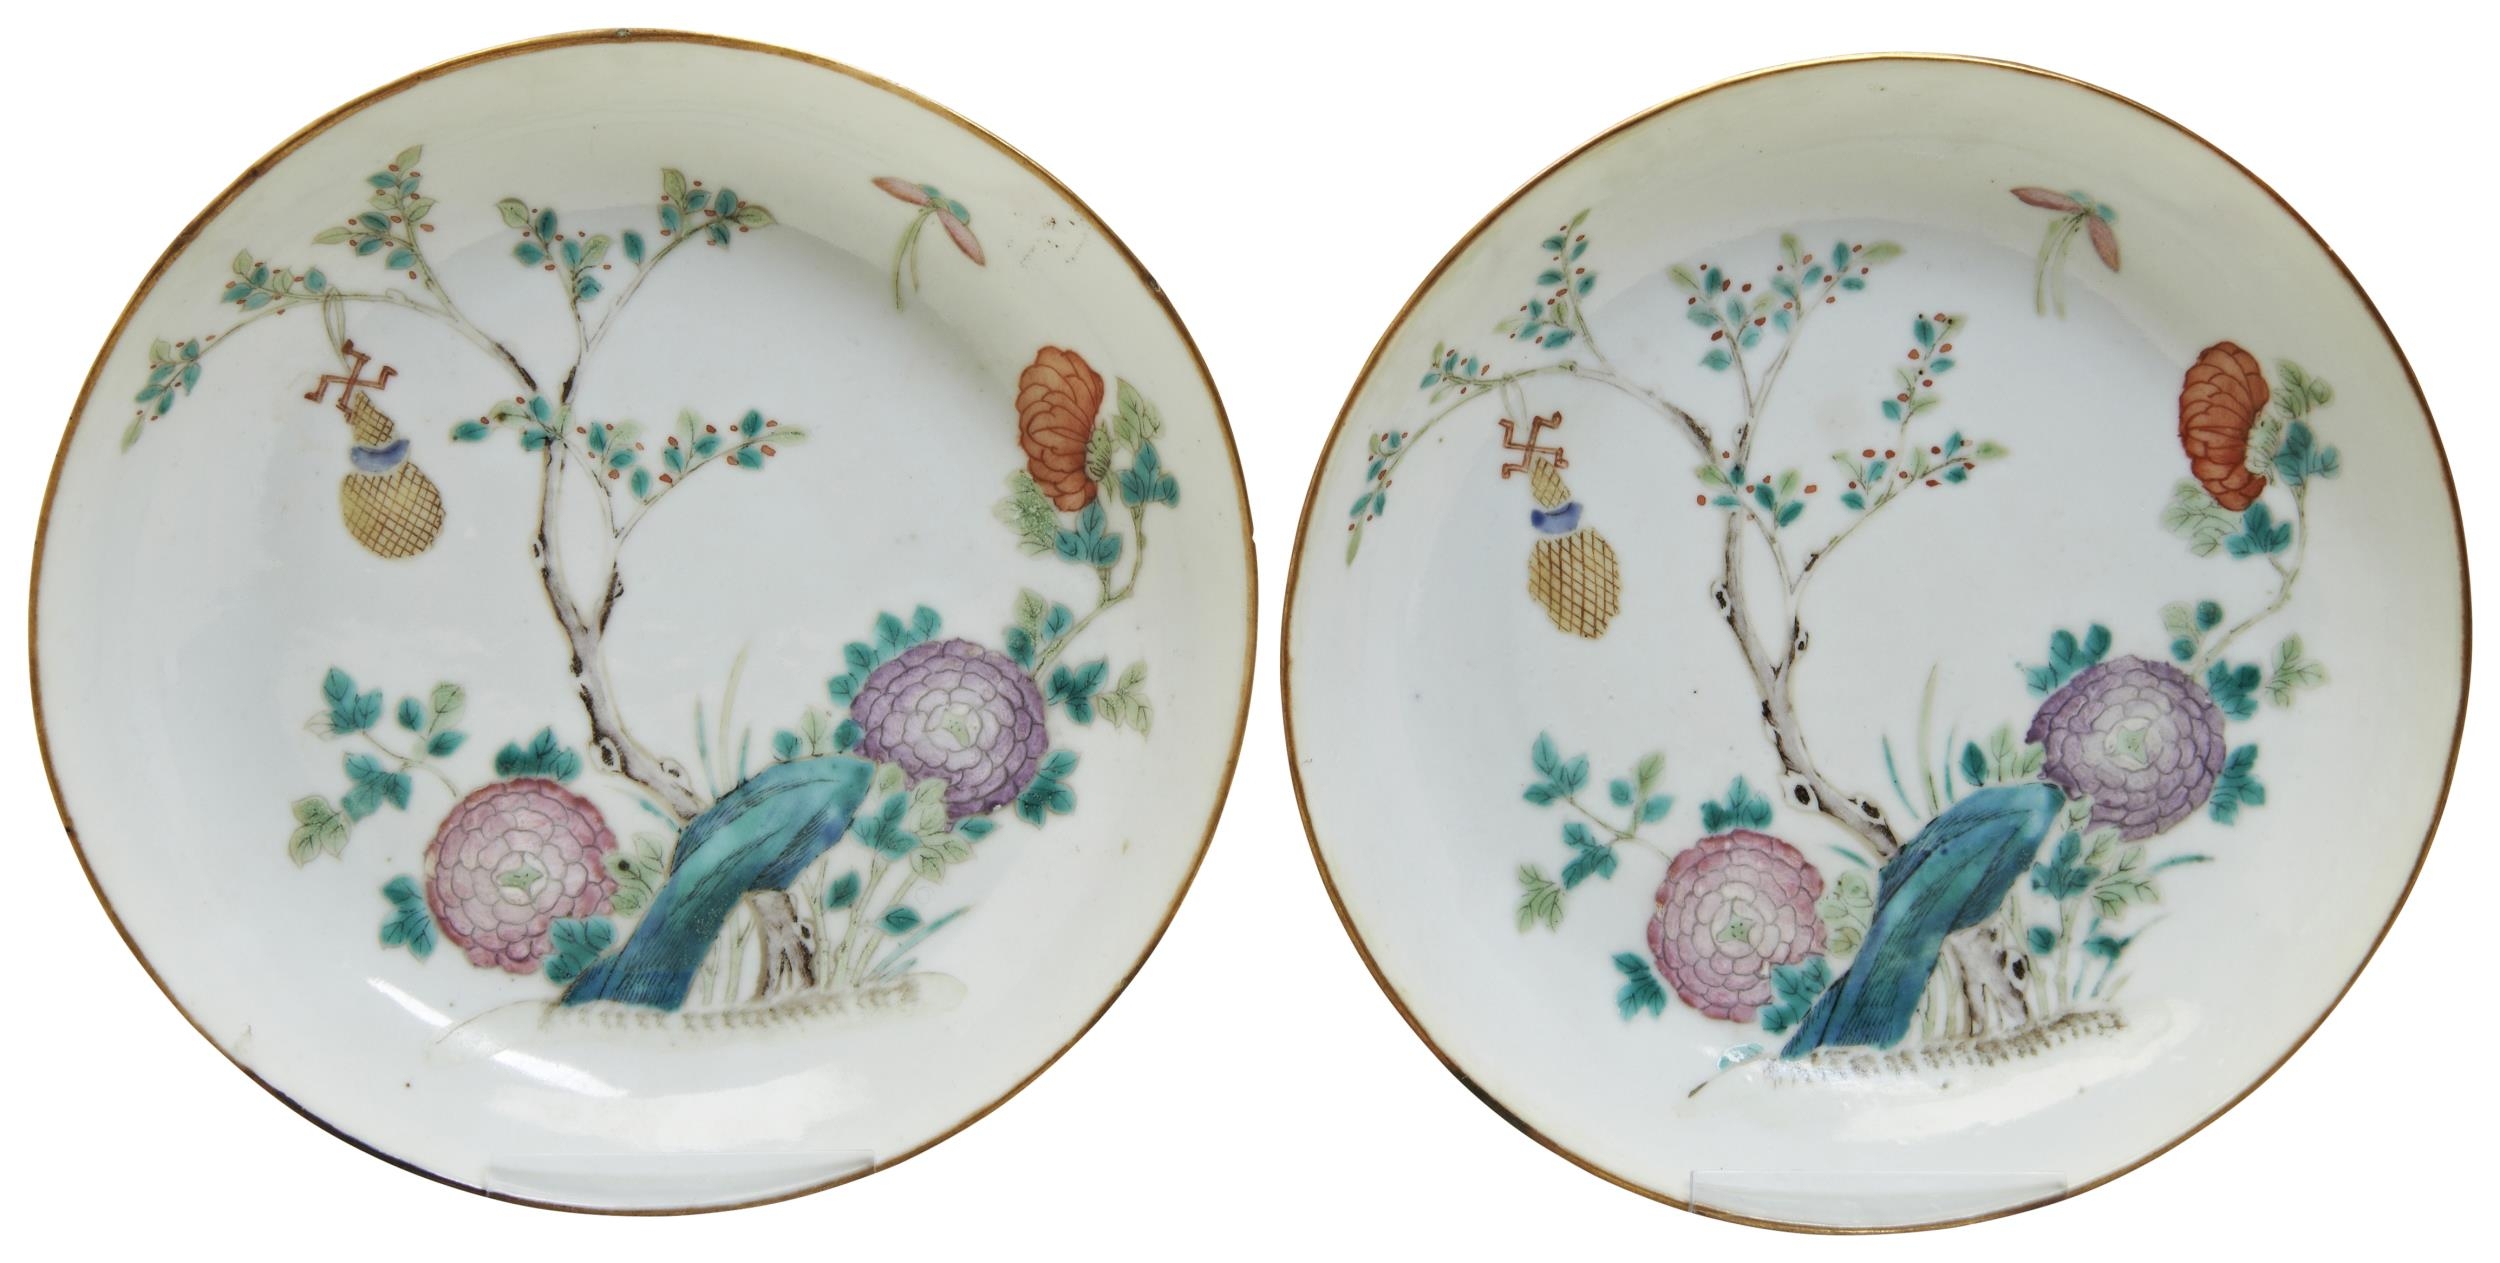 A PAIR OF FAMILLE ROSE DISHES TONGZHI SEAL MARKS IN IRON-RED AND OF THE PERIOD painted with brightly